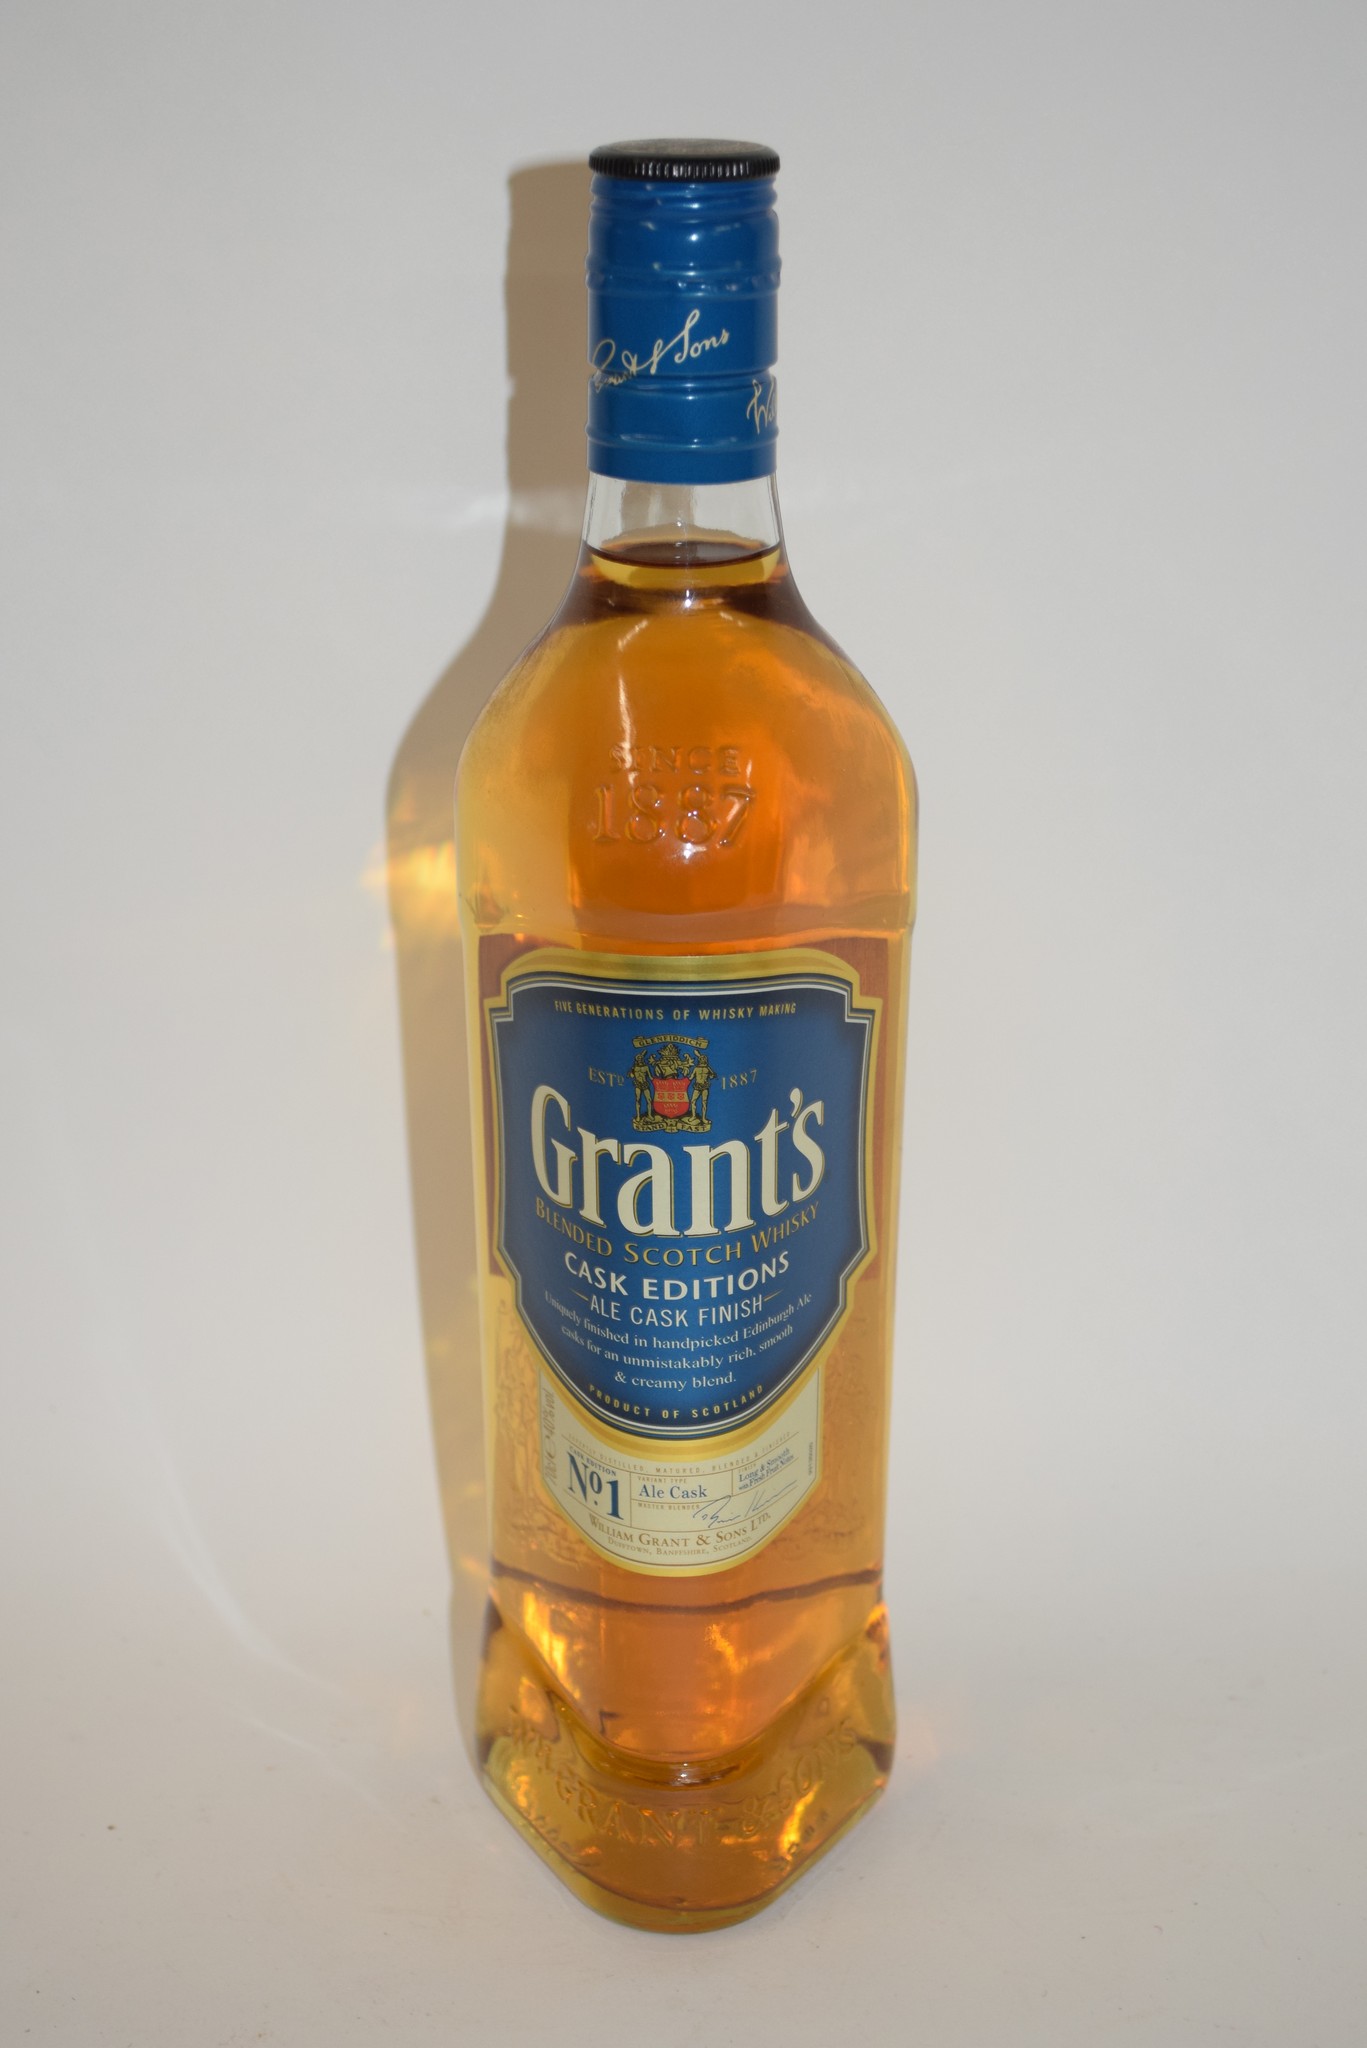 One bottle of Grant's blended Scotch Whisky, cask edition, 70cl, 40% vol